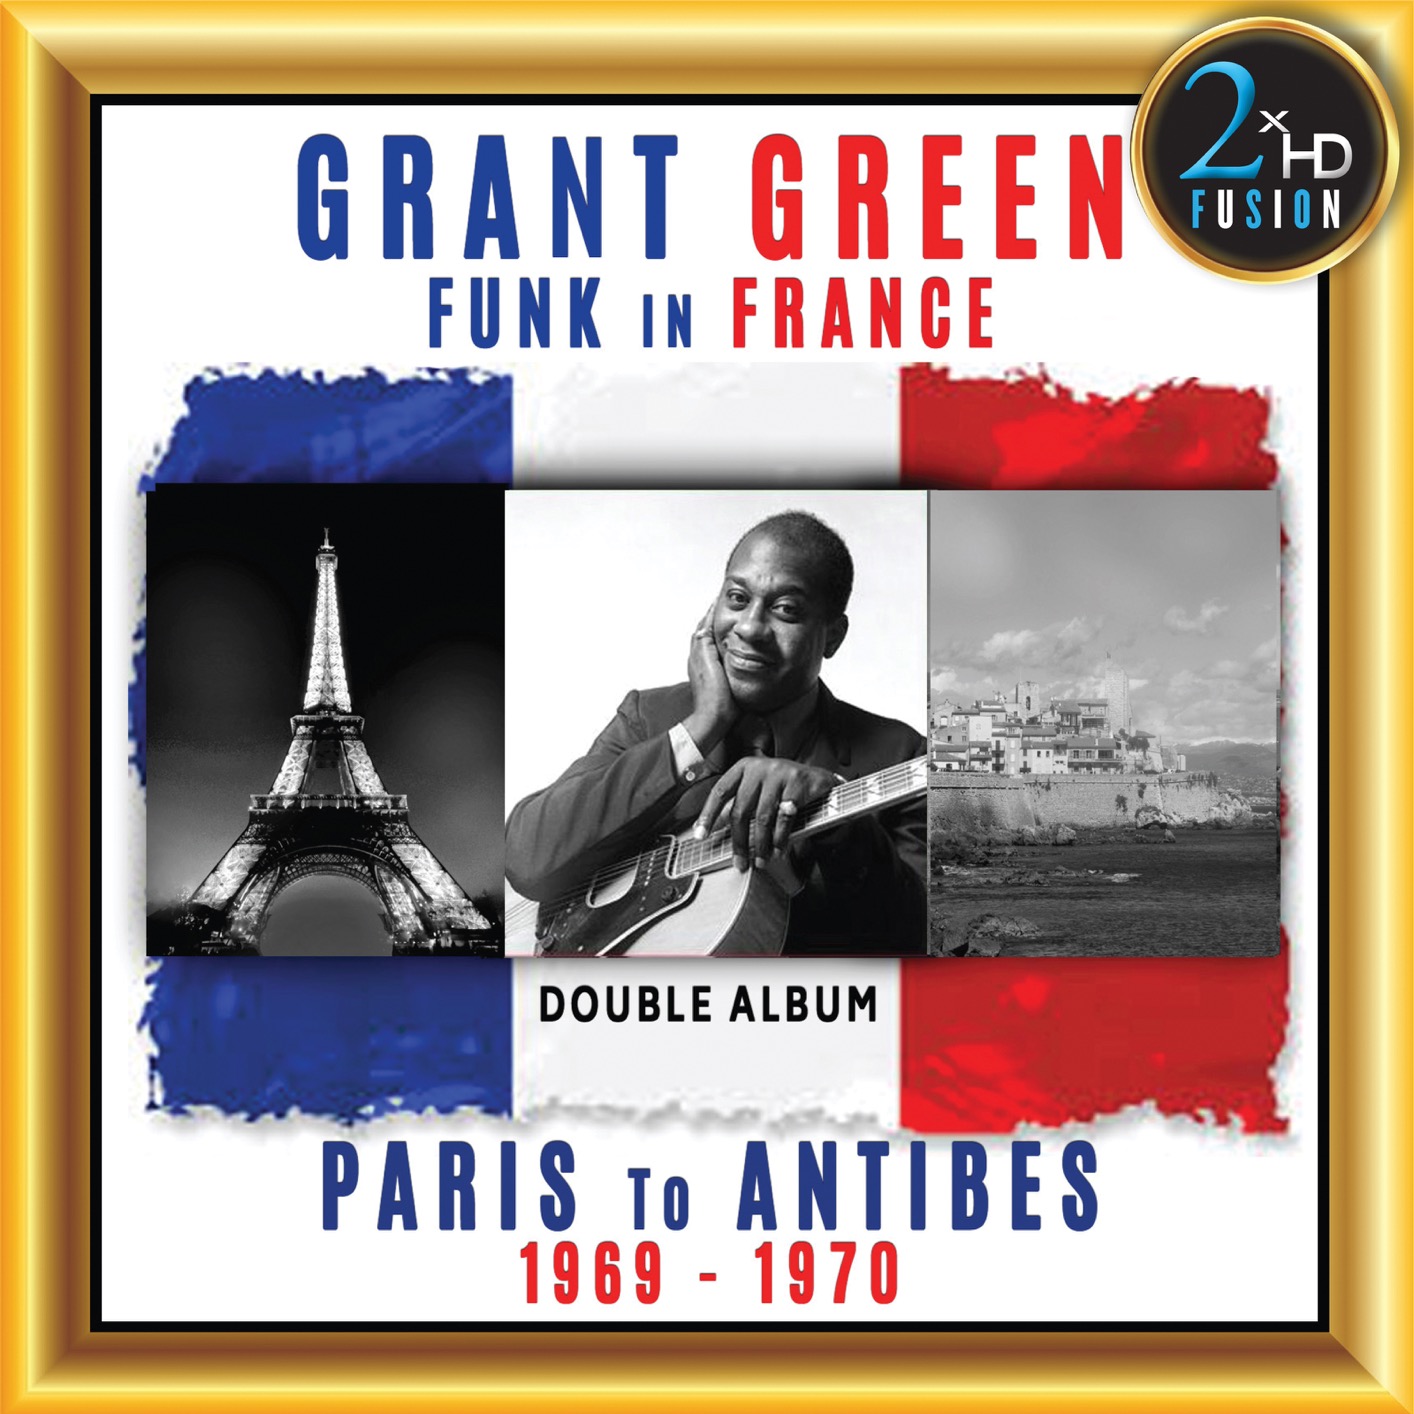 Grant Green – Green: Funk in France – Paris to Antibes (Live – Remastered) (2019) [FLAC 24bit/192kHz]